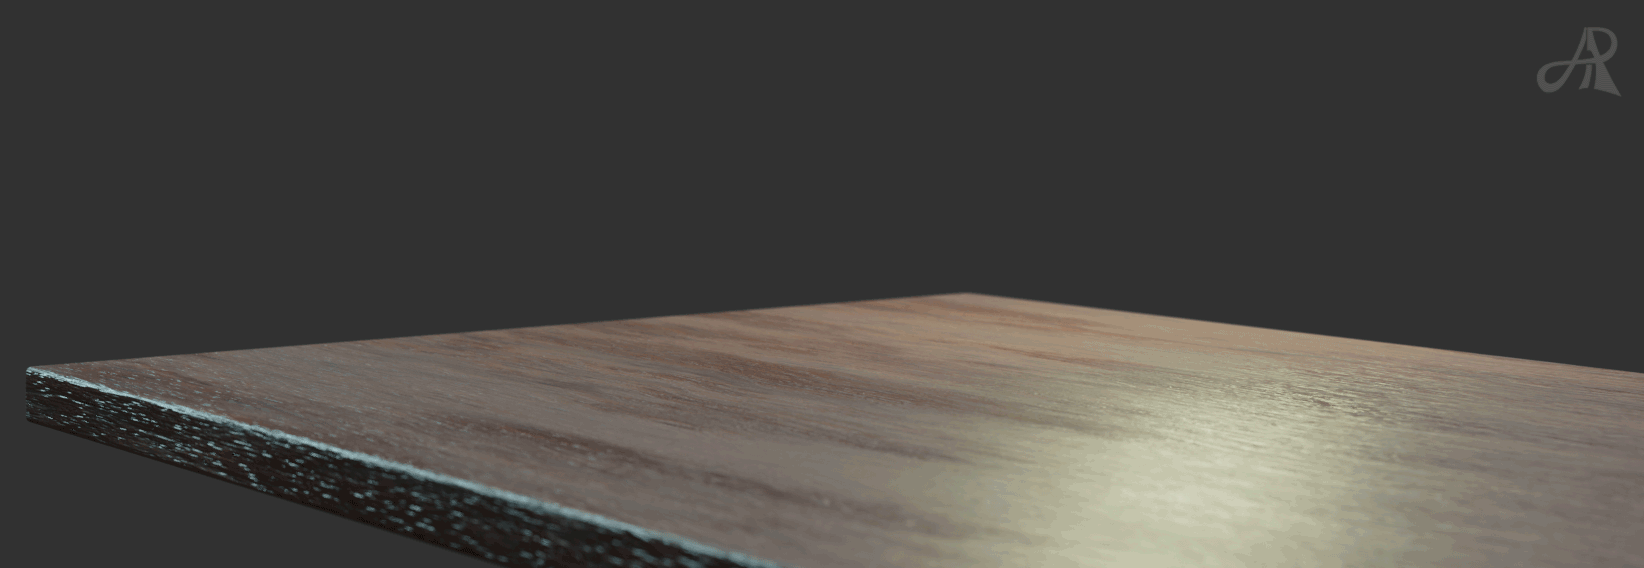 Table material - adding imperfections + few objects